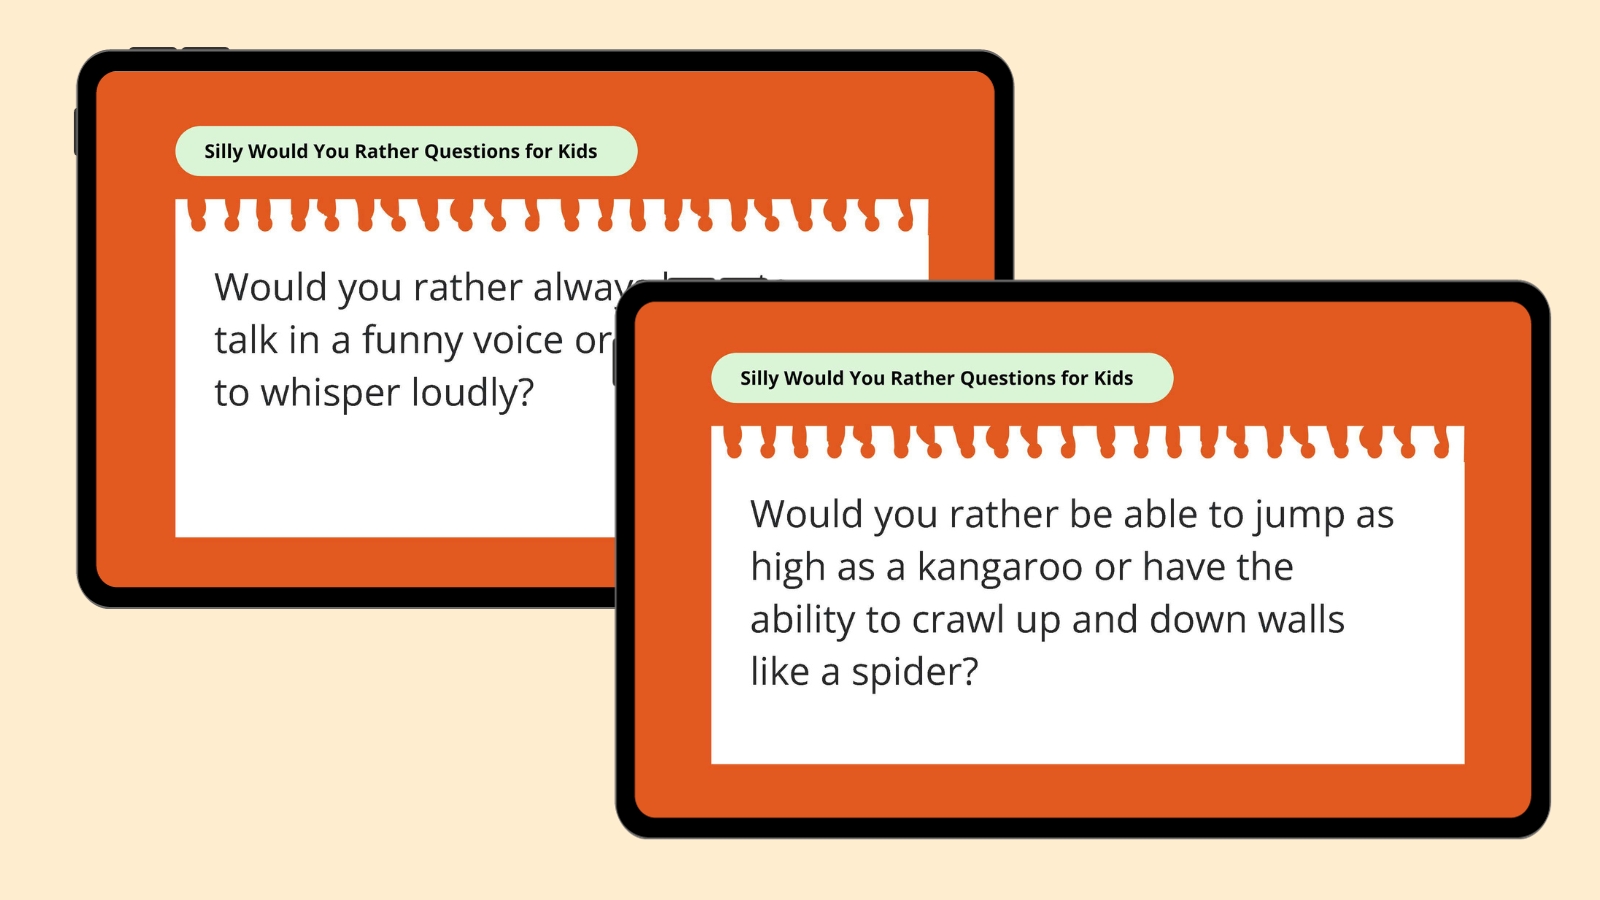 Would you rather be able to jump as high as a kangaroo or have the ability to crawl up and down walls like a spider?- would you rather questions for kids